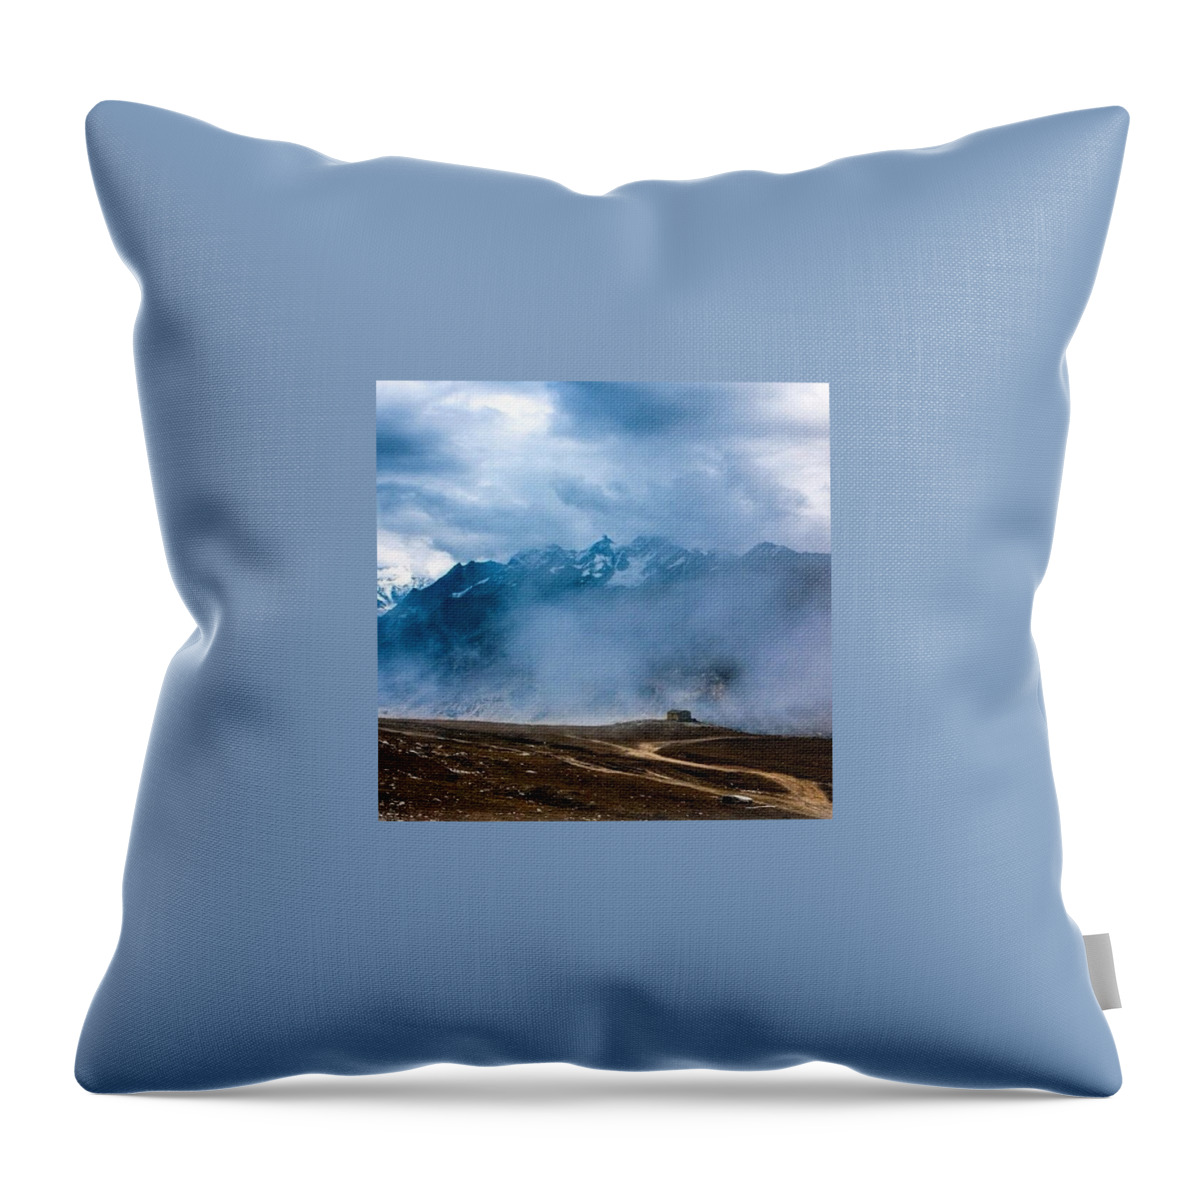 Beautiful Throw Pillow featuring the photograph Remote by Aleck Cartwright